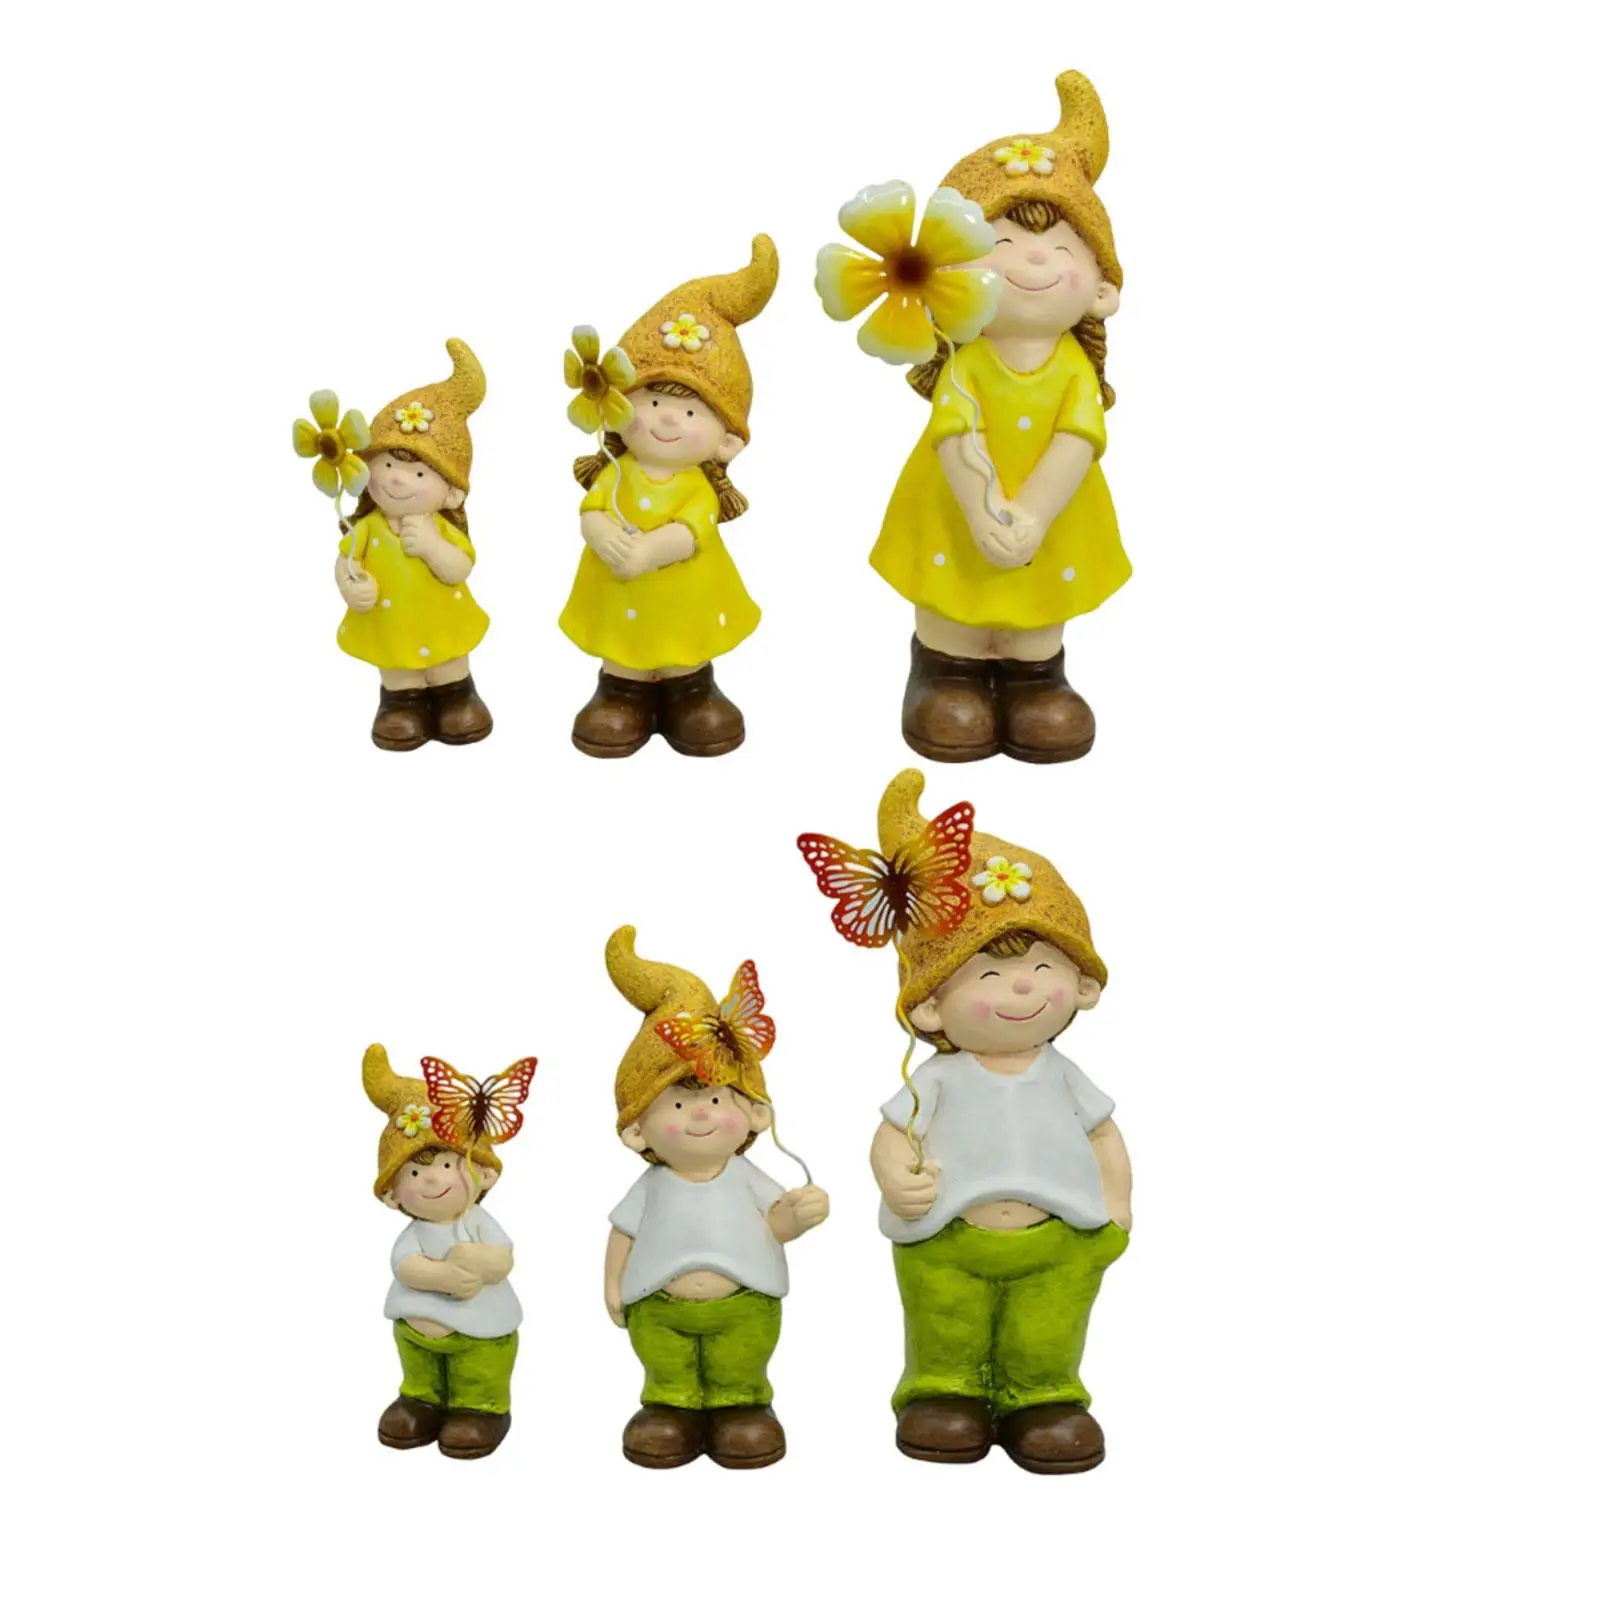 3 Pieces Figure Sculptures Decorations for Anniversary Entrance Gift